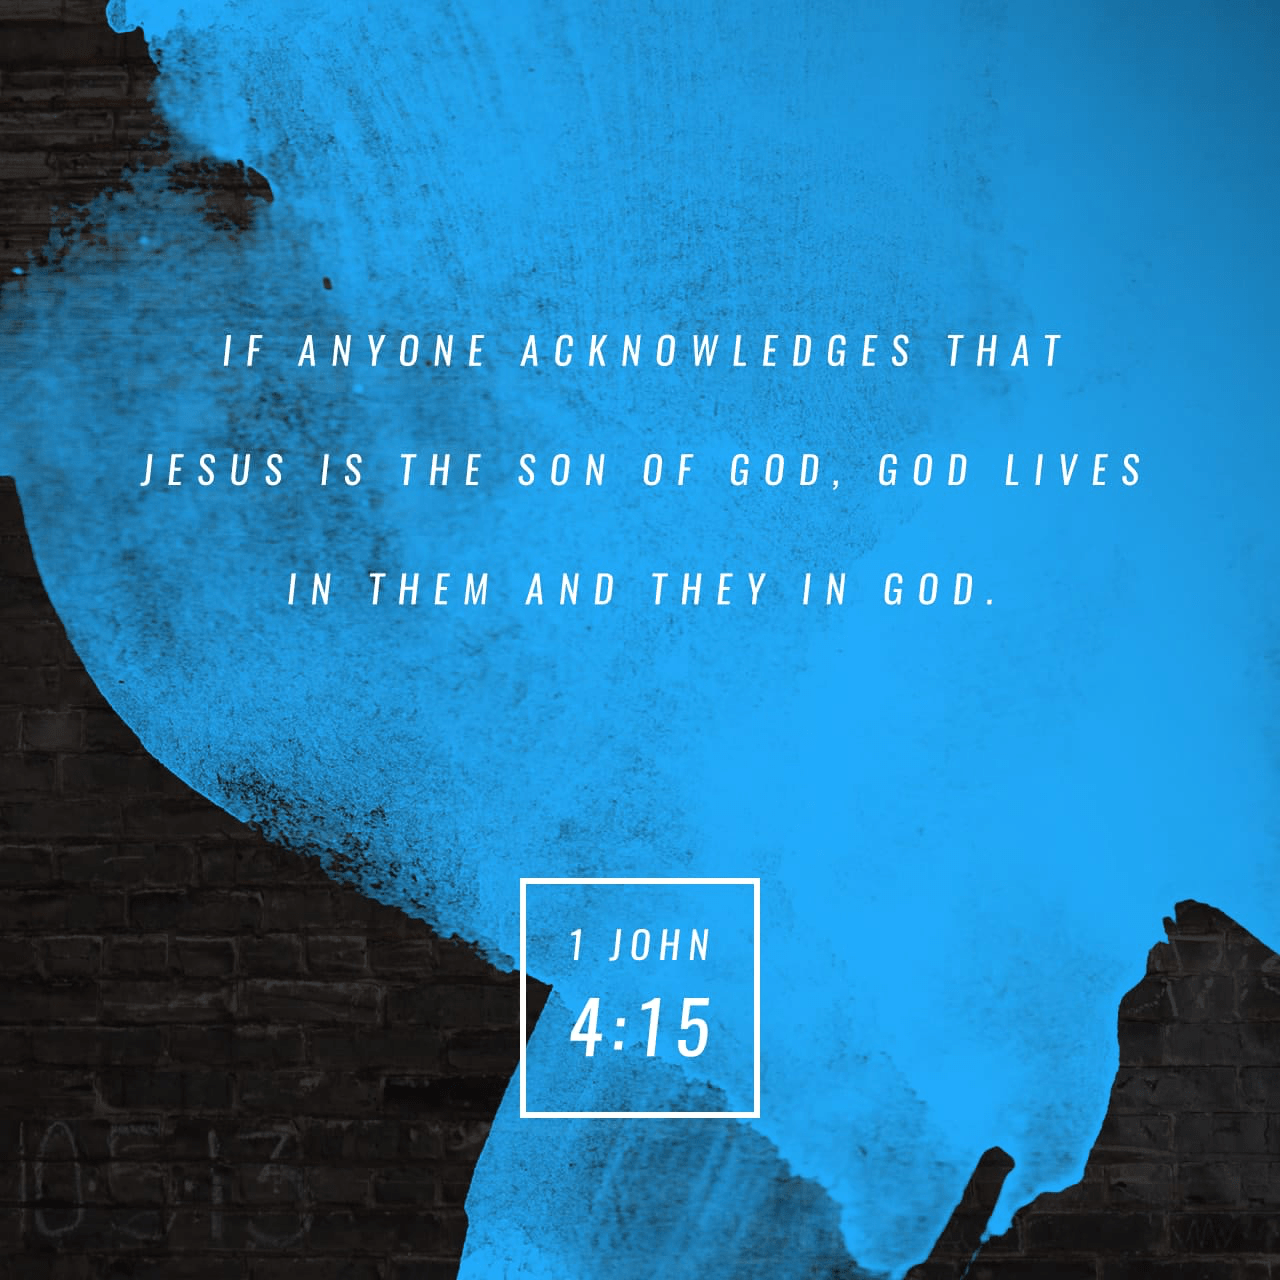 VOTD January 6 - “Whoever confesses that Jesus is the Son of God, God abides in him, and he in God.” ‭‭1 John‬ ‭4:15‬ ‭NASB‬‬